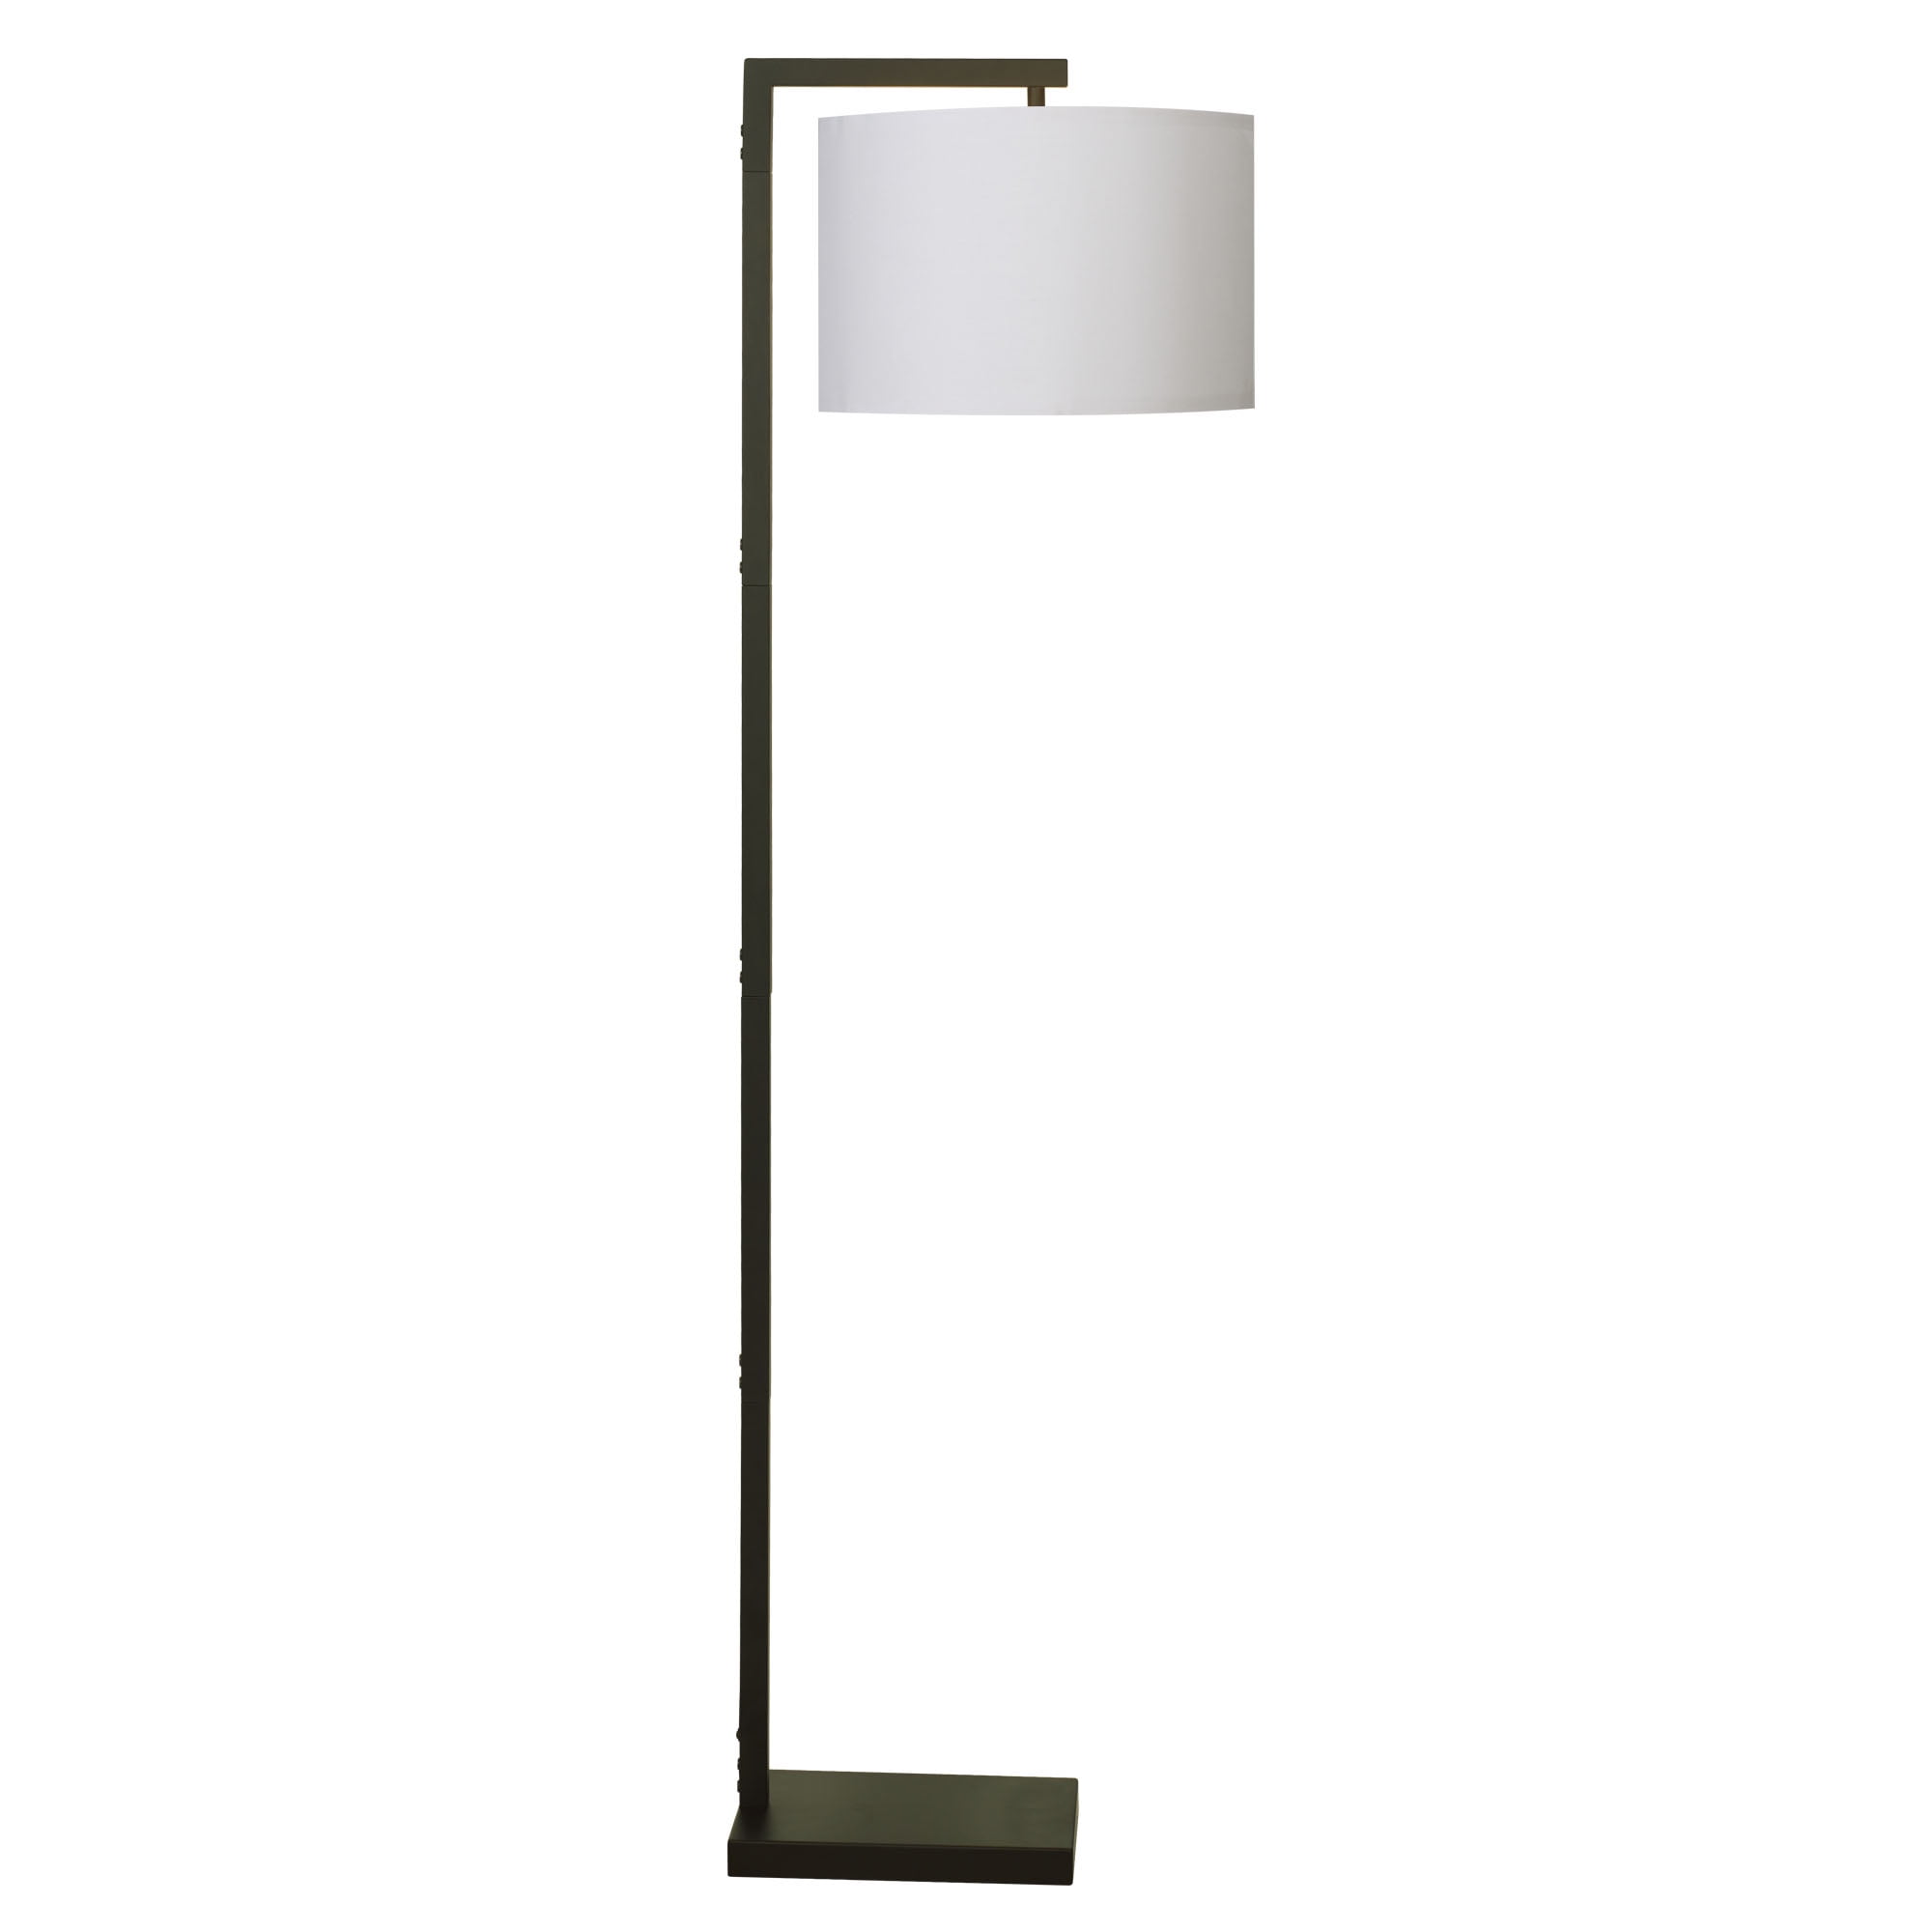 Mainstays Contemporary Metal 62in Floor Lamp with on/off Foot Switch, Black - 2